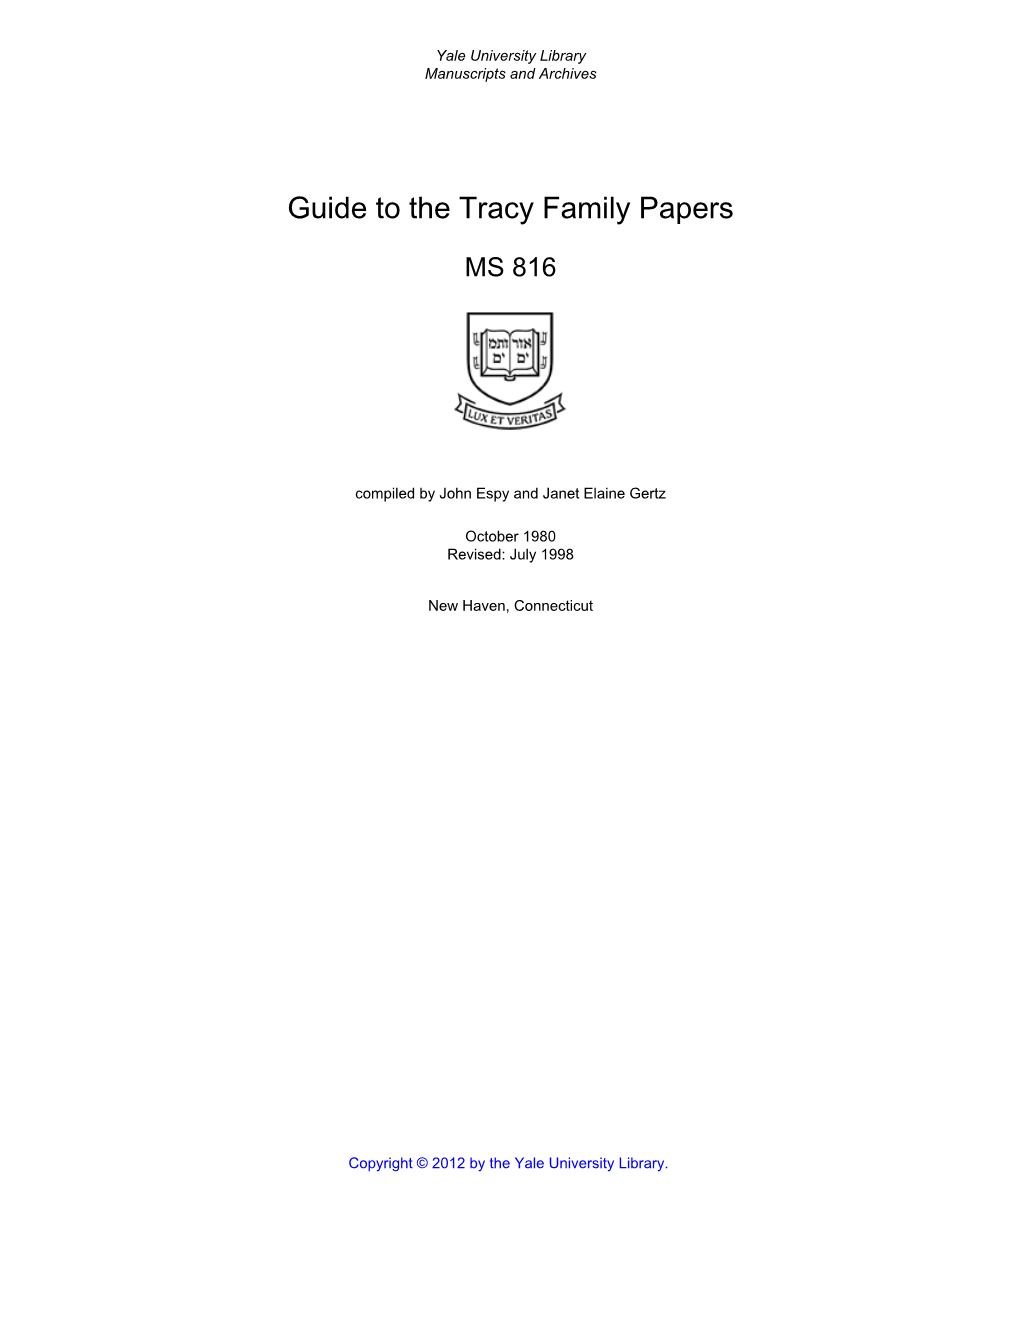 Guide to the Tracy Family Papers